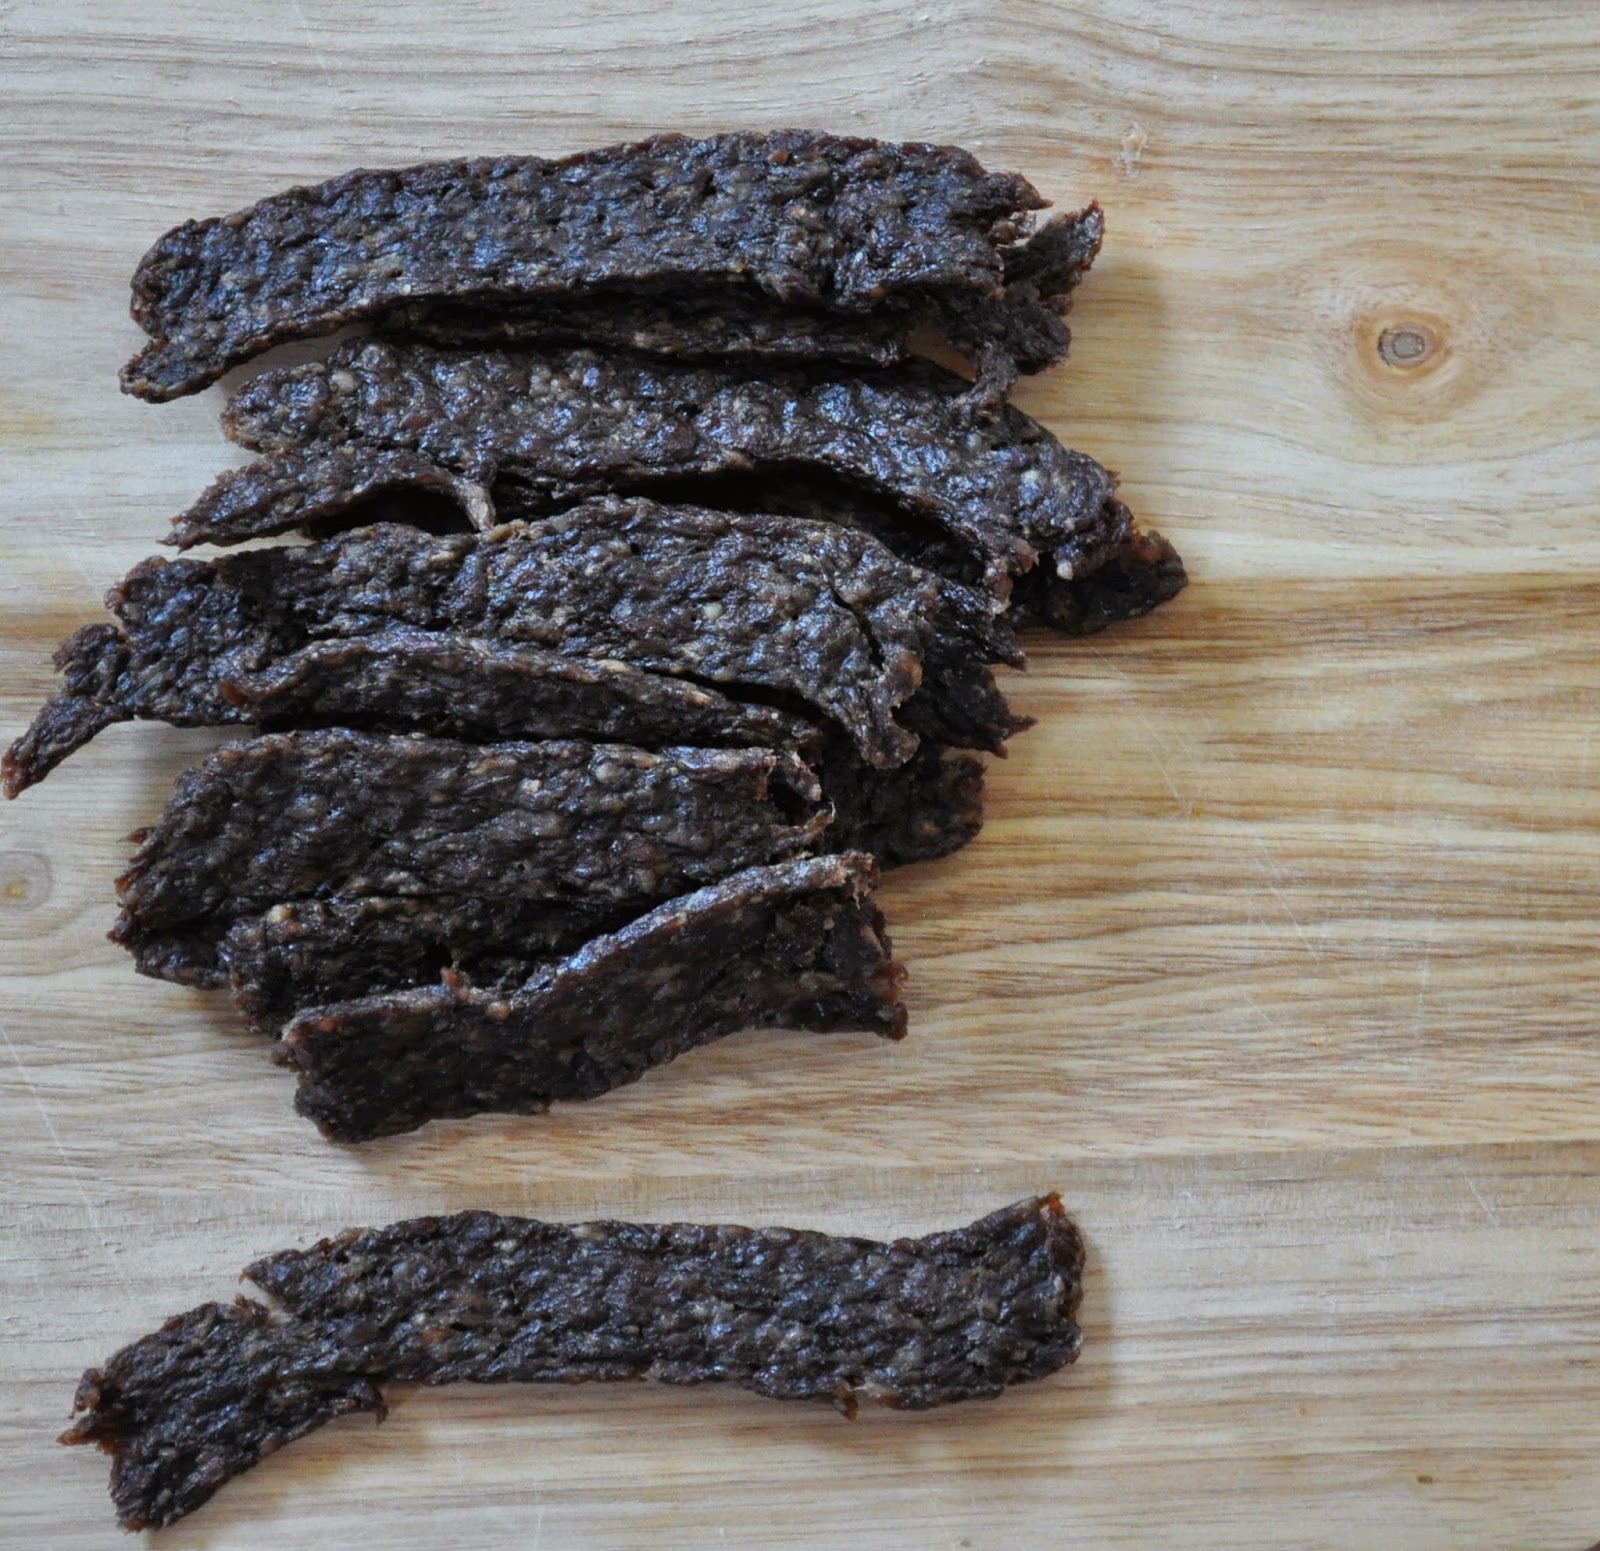 Easy Homemade Ground Beef Jerky Recipe is Budget Friendly